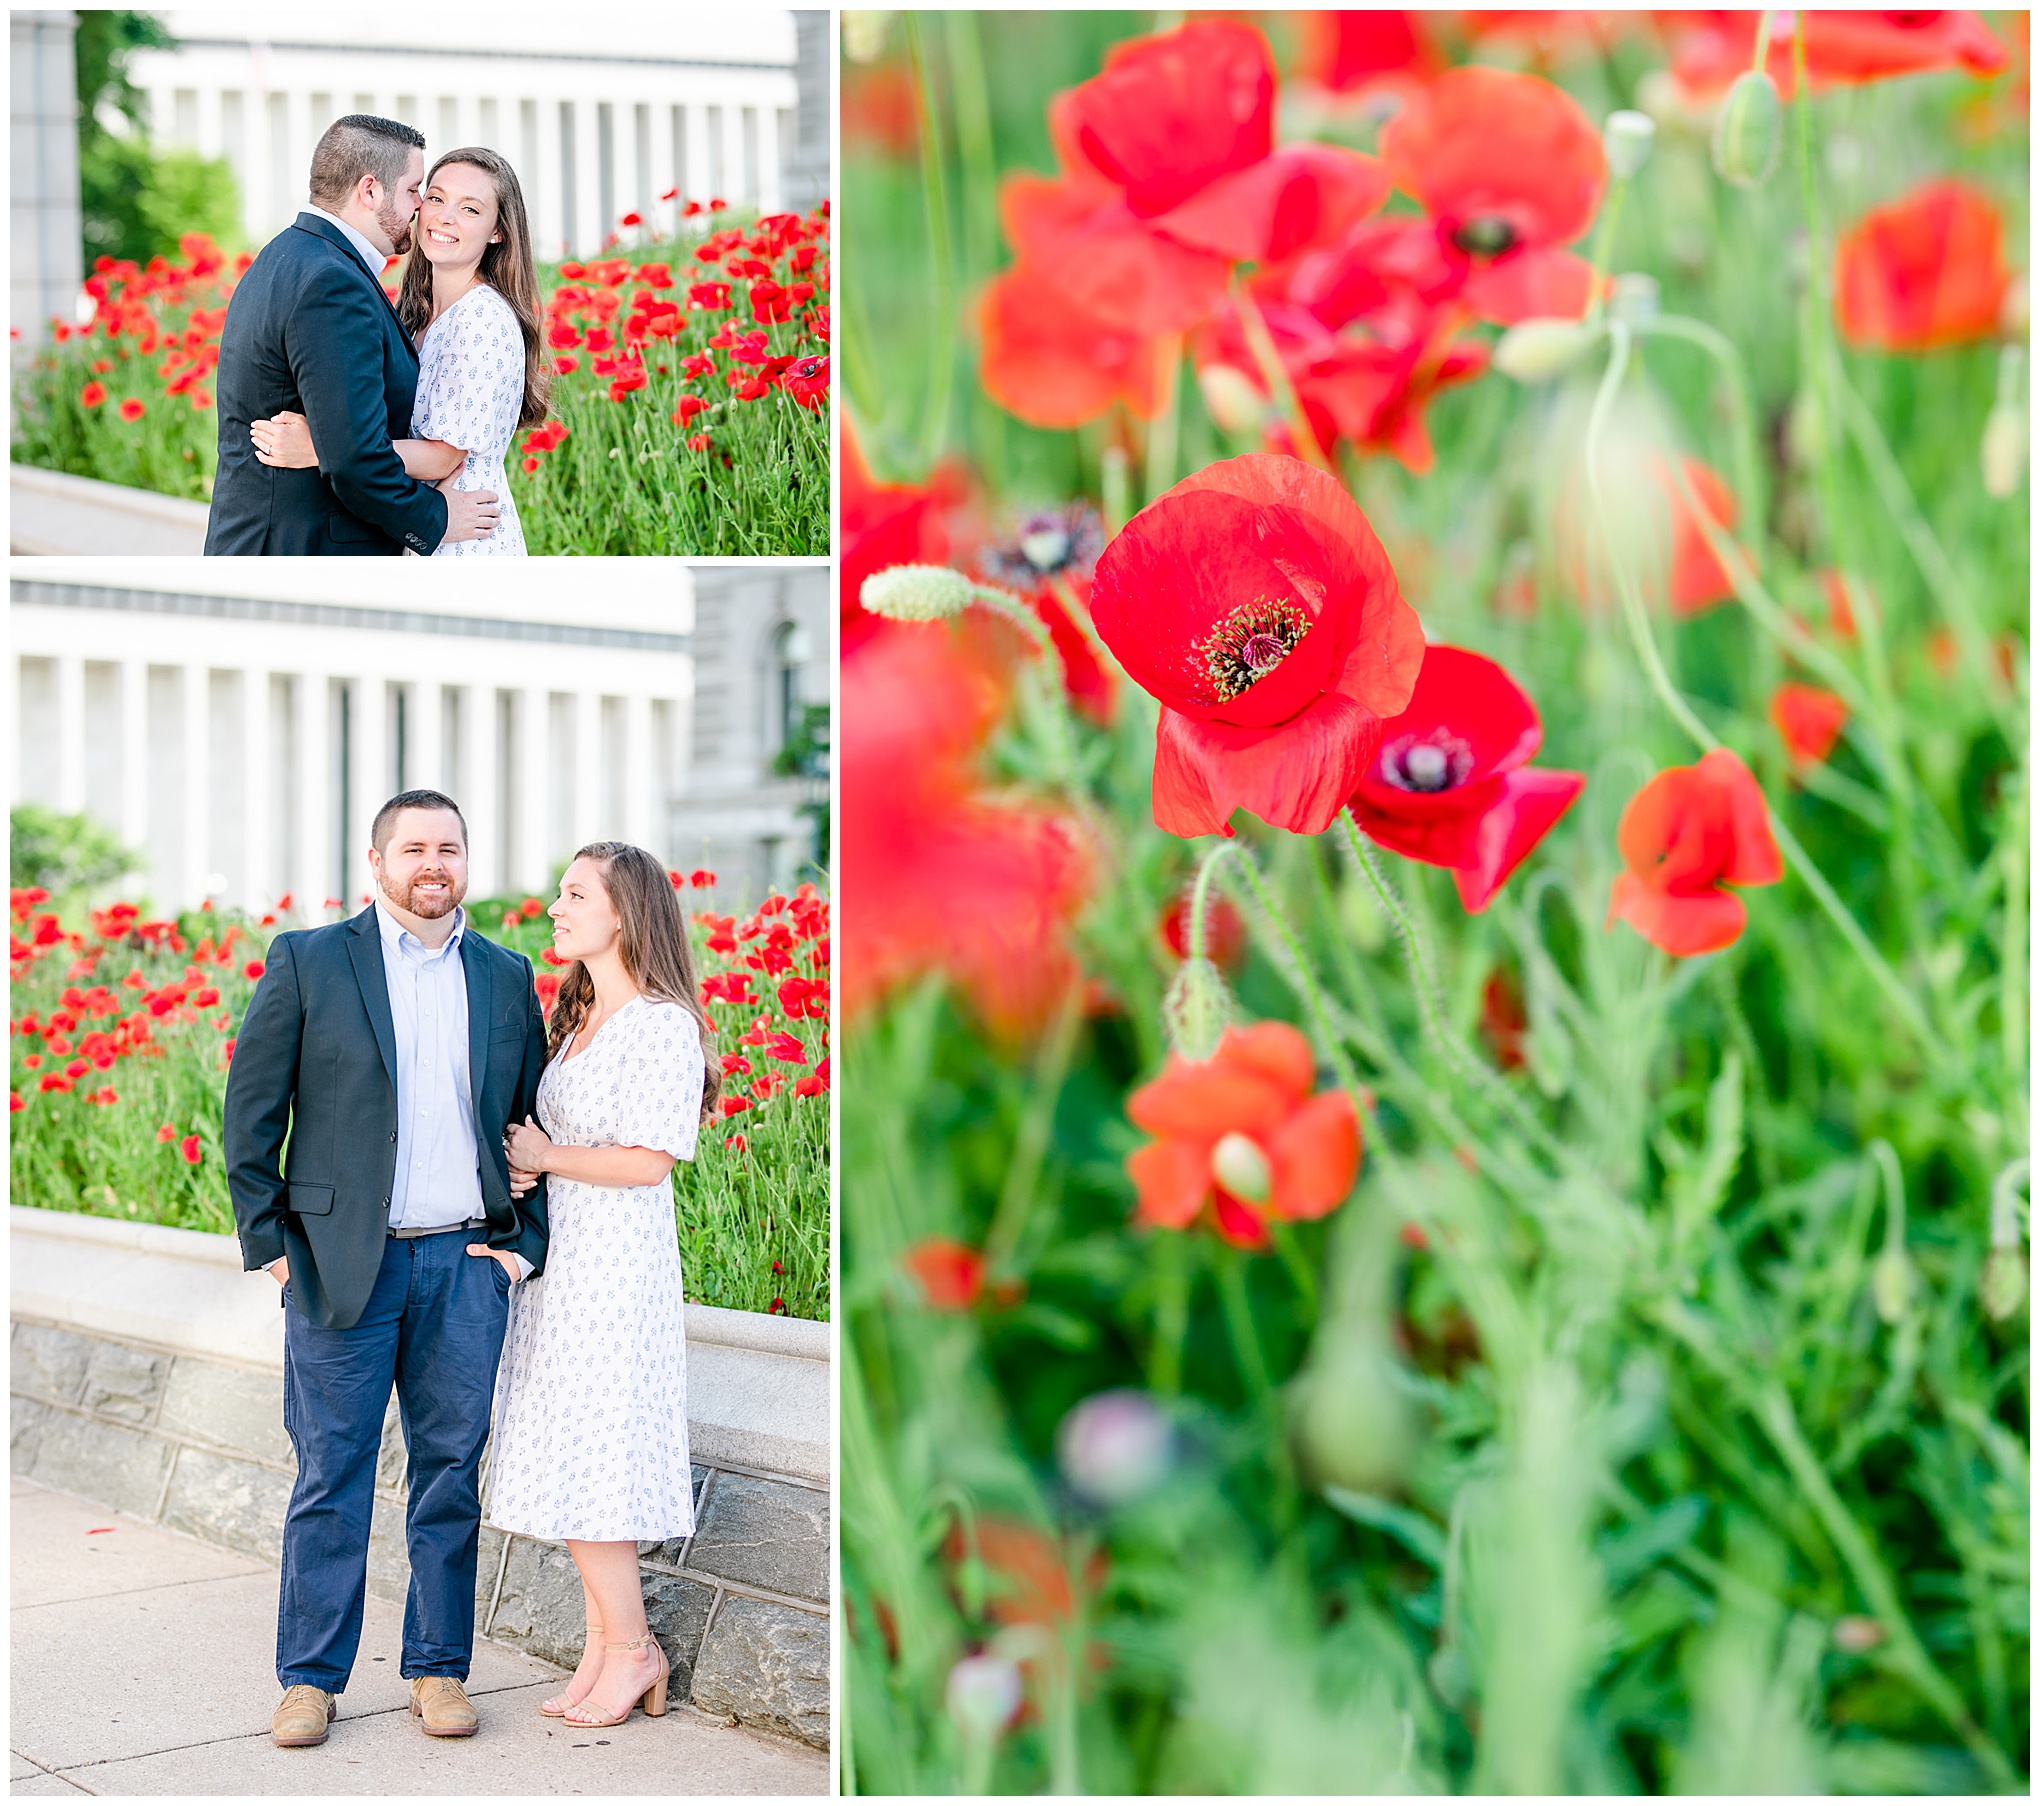 Capitol Hill engagement session, Capitol Hill portraits, D.C. engagement photography, D.C. engagement photographer, D.C. Capitol Hill D.C., DC photography, engagement photography, Rachel E.H. Photography, classic engagement photos, spring engagement photos, poppy garden